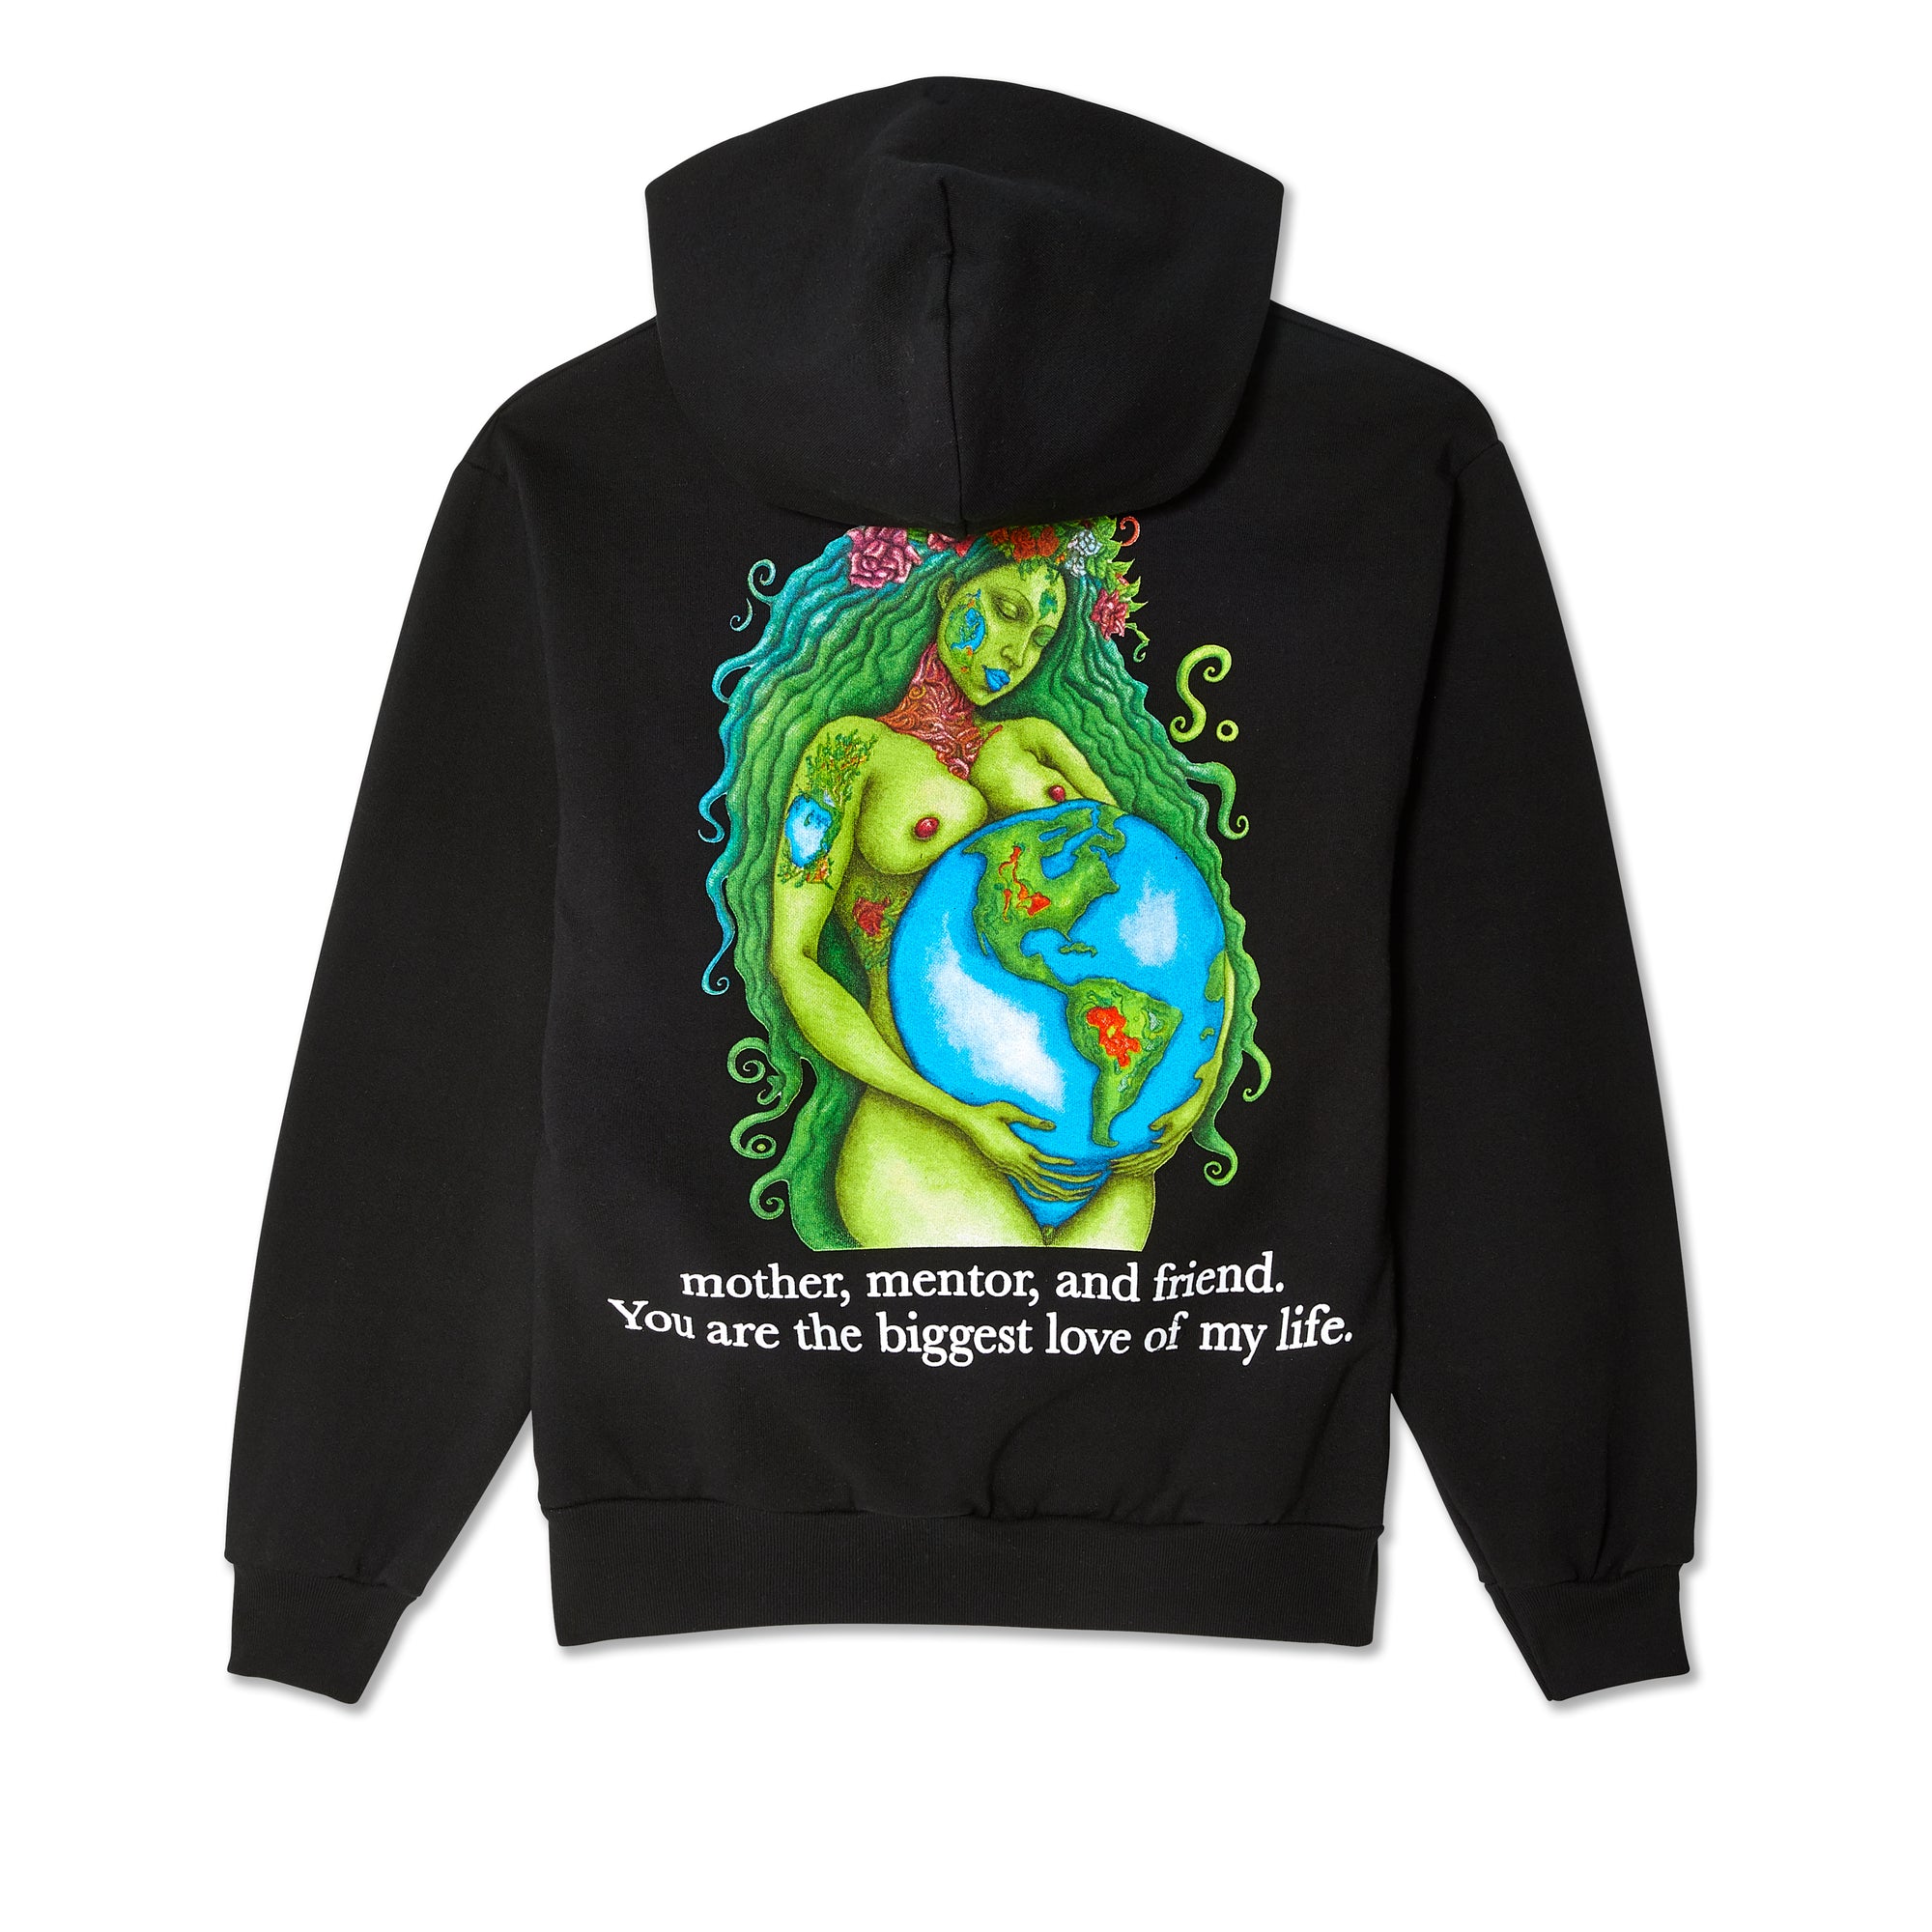 Online Ceramics - Heal Our Planet Earth Hoodie - (Black) view 2